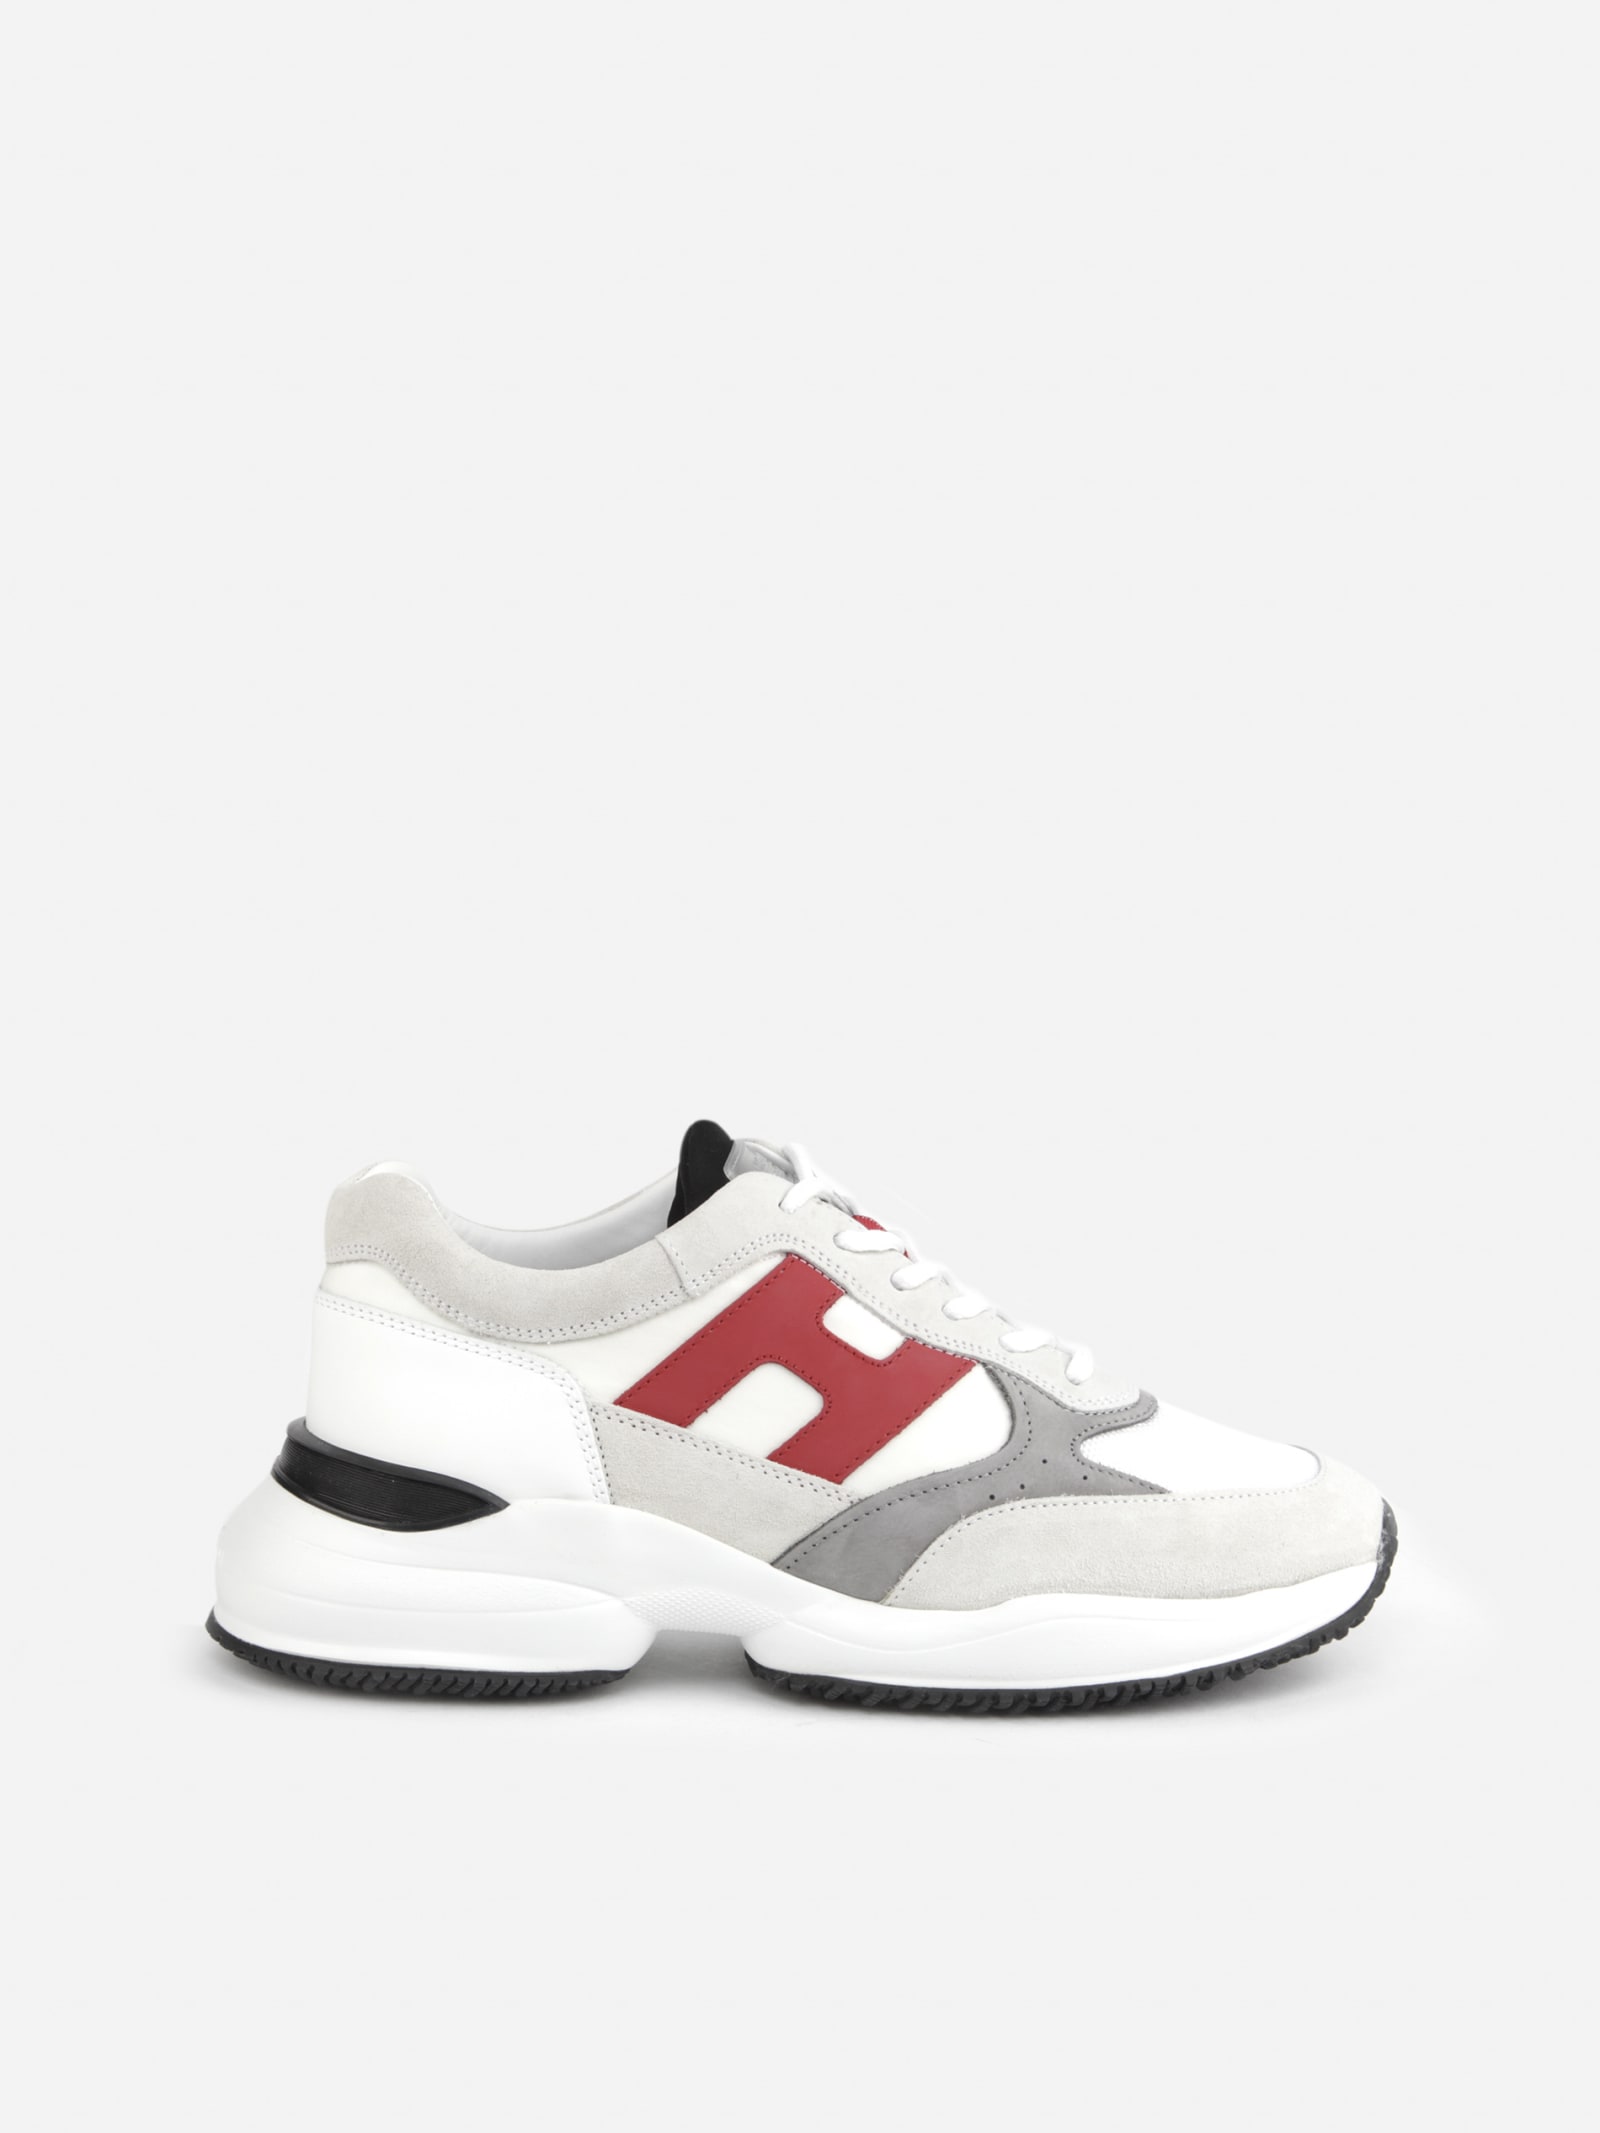 Hogan Interaction Sneakers In Suede With Technical Fabric Inserts